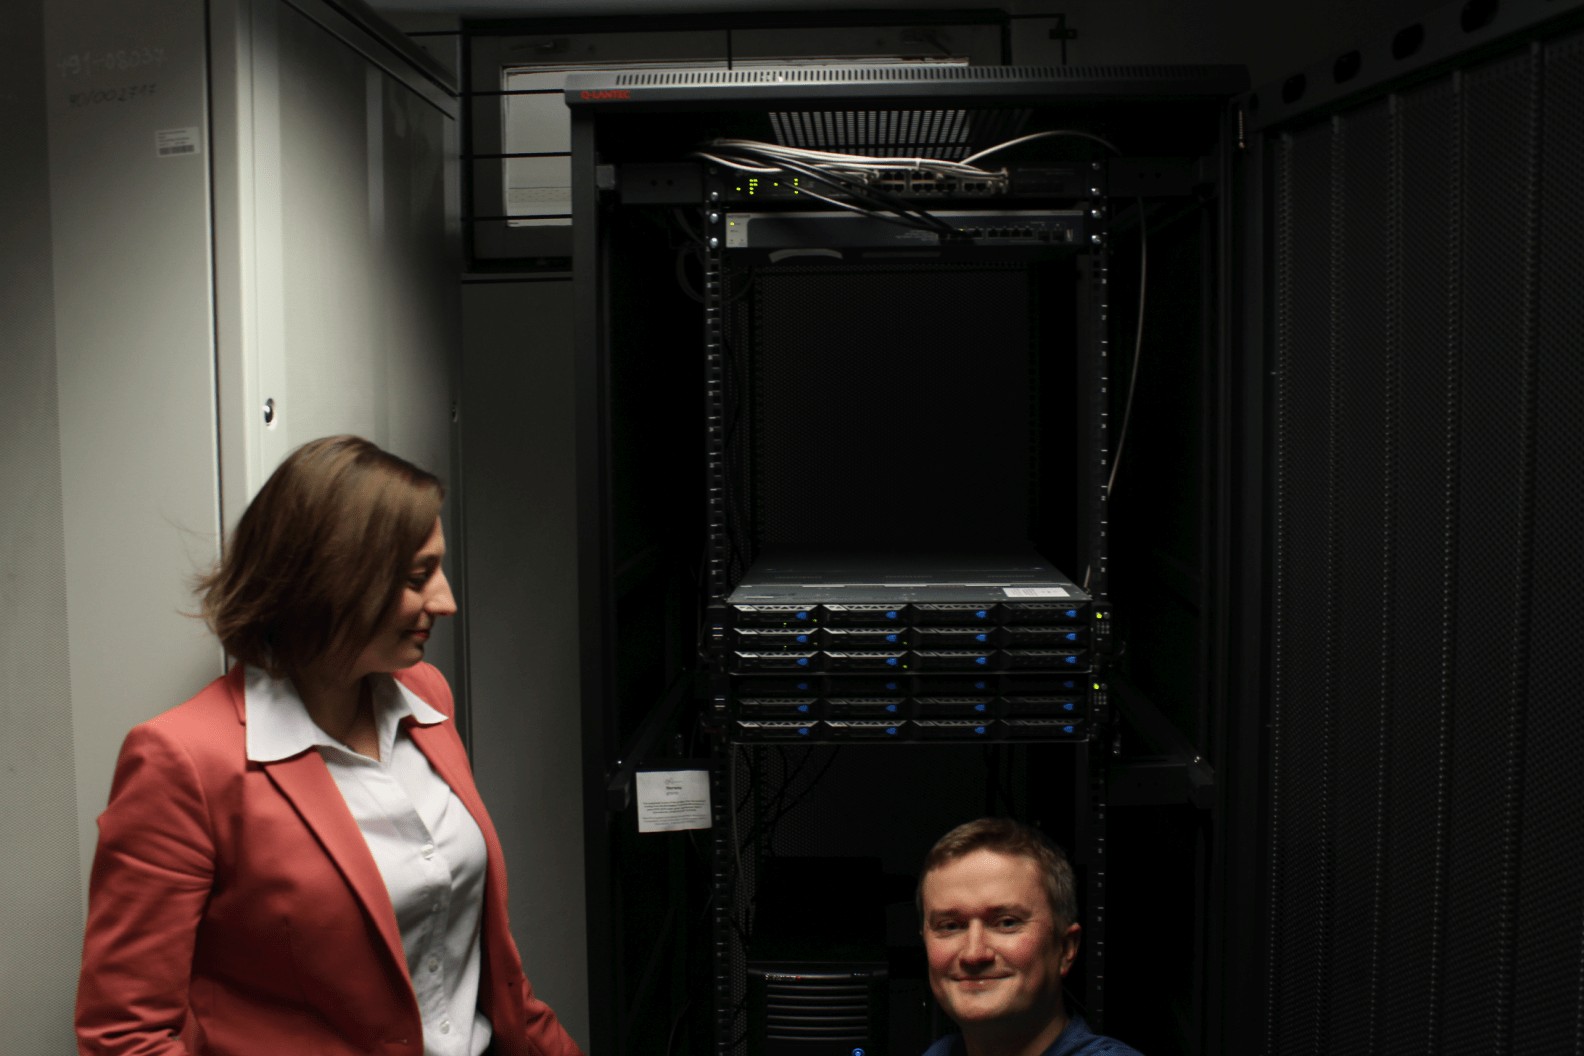 Anna Dyrdal and Stefan Stagraczynski in front of the servers